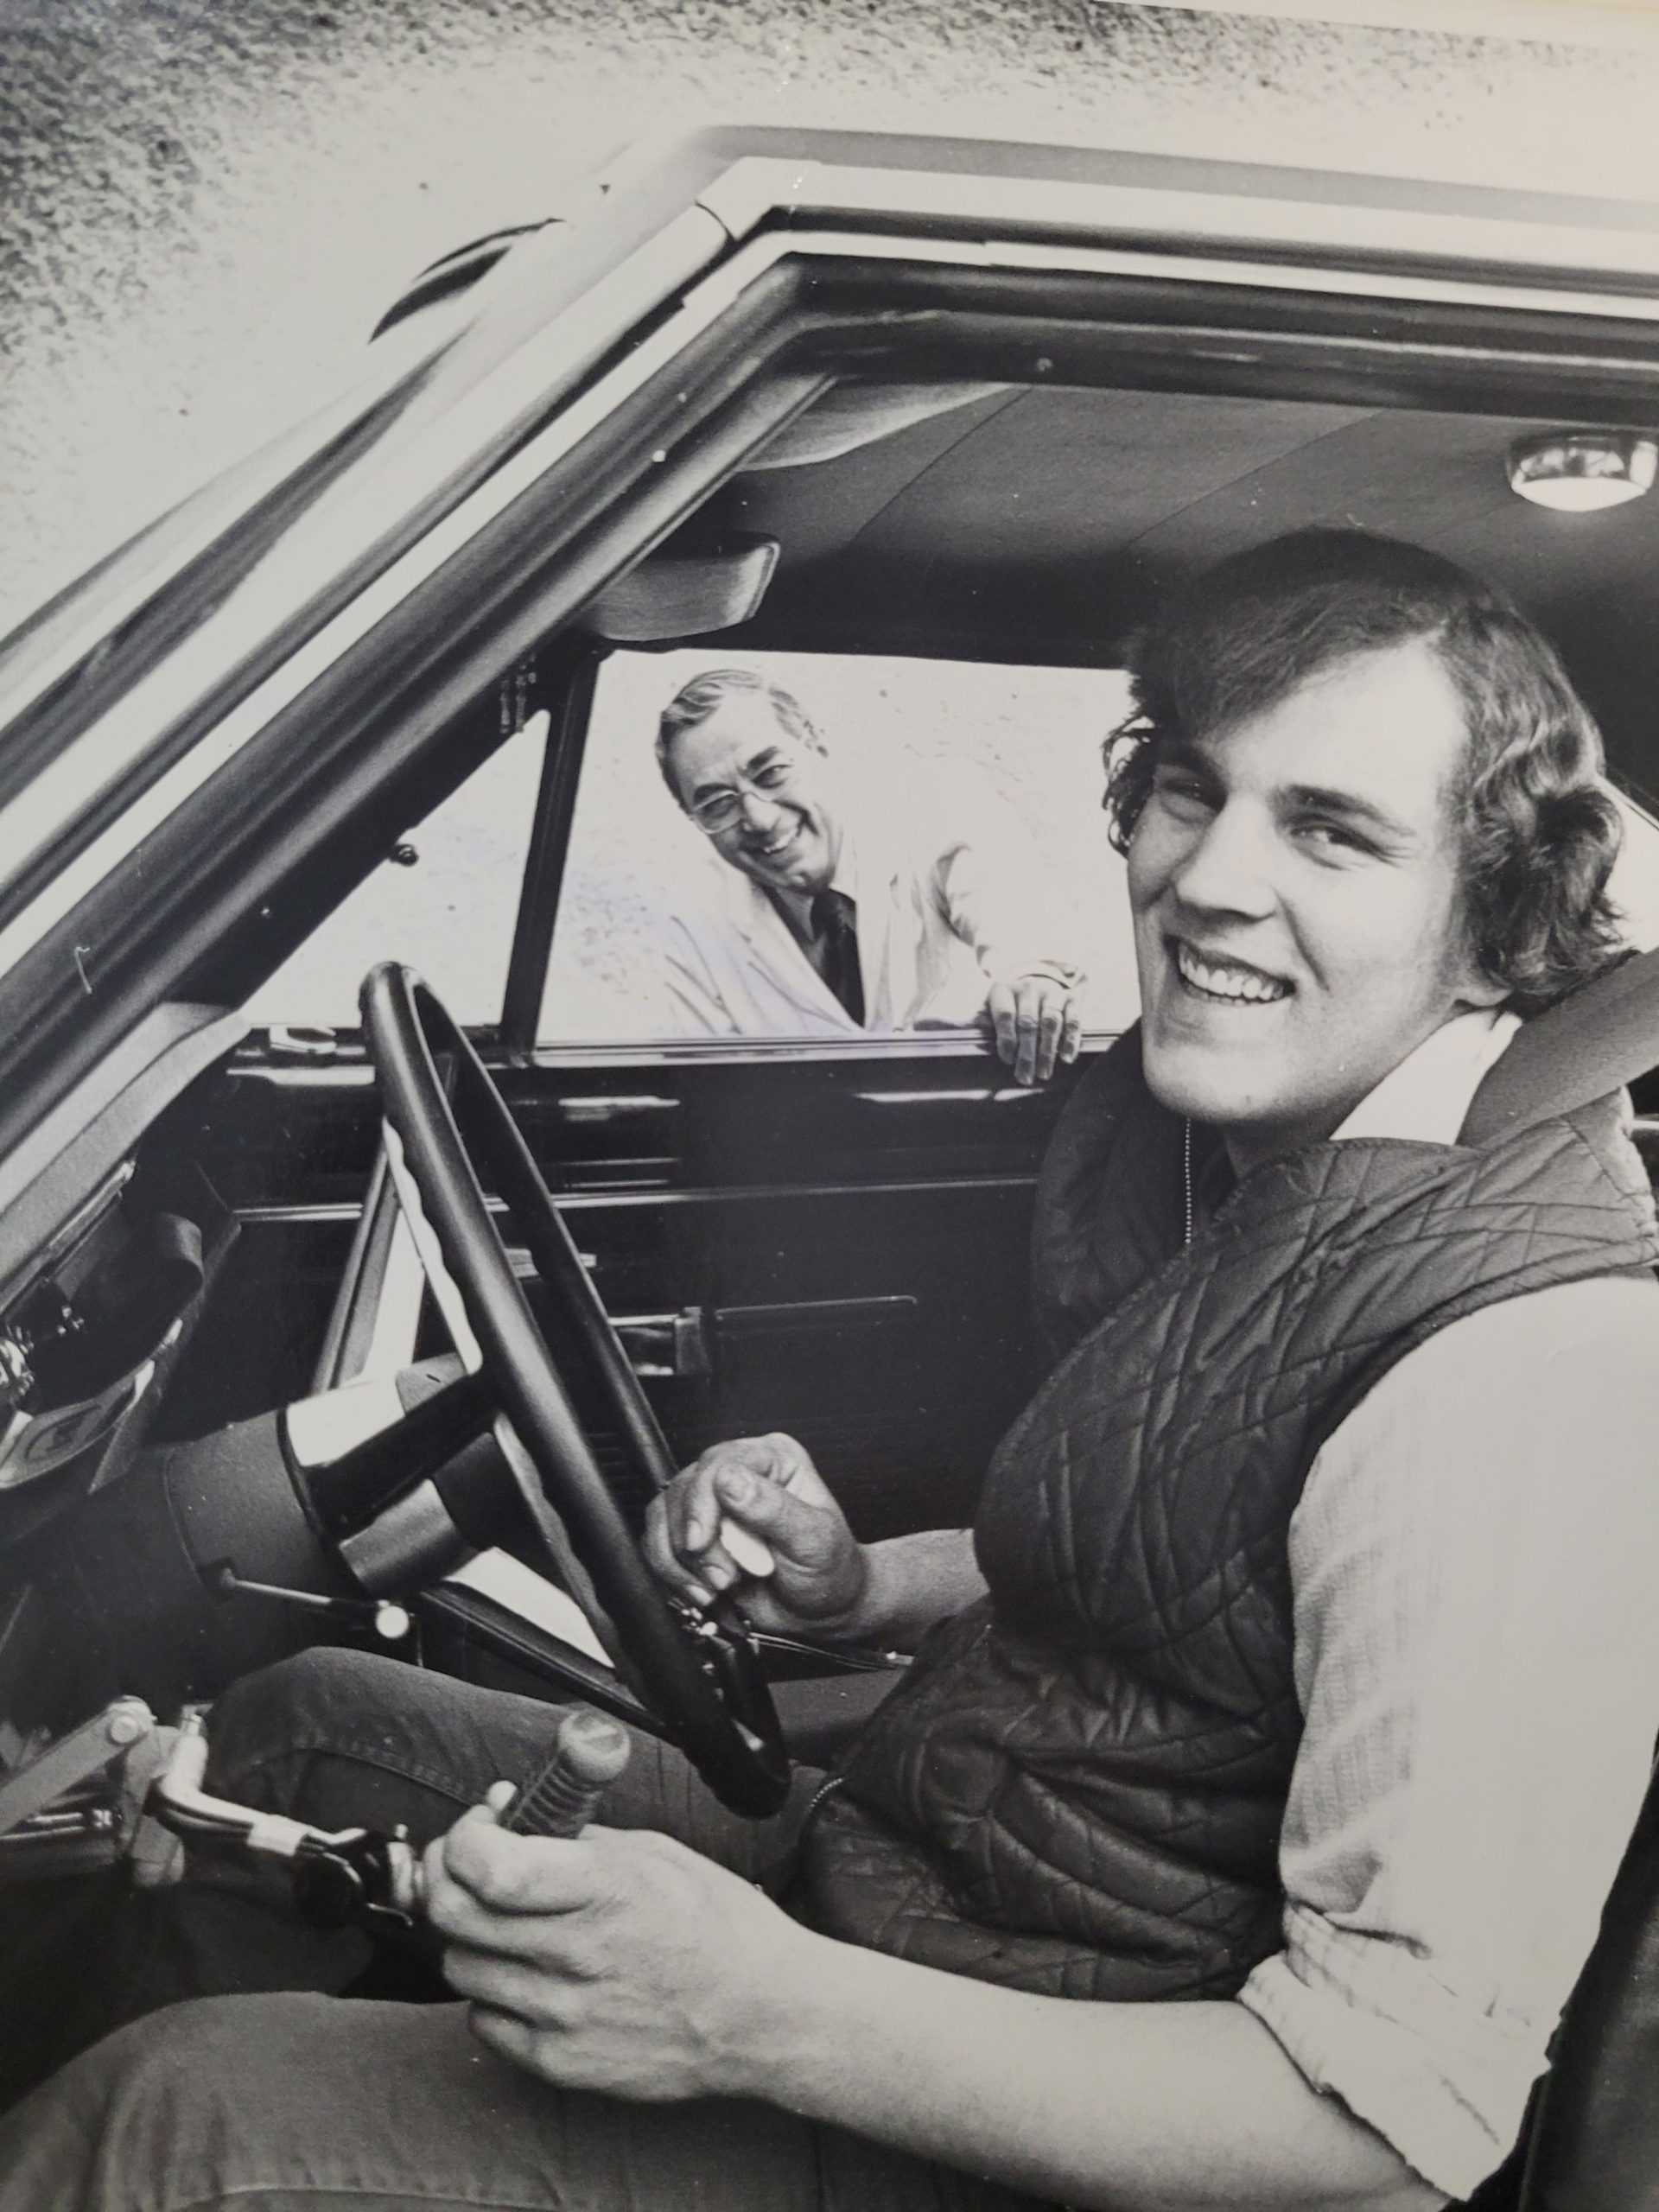 Ken Wright with his doctor pictured in his first adaptive car (note the hand throttle control).